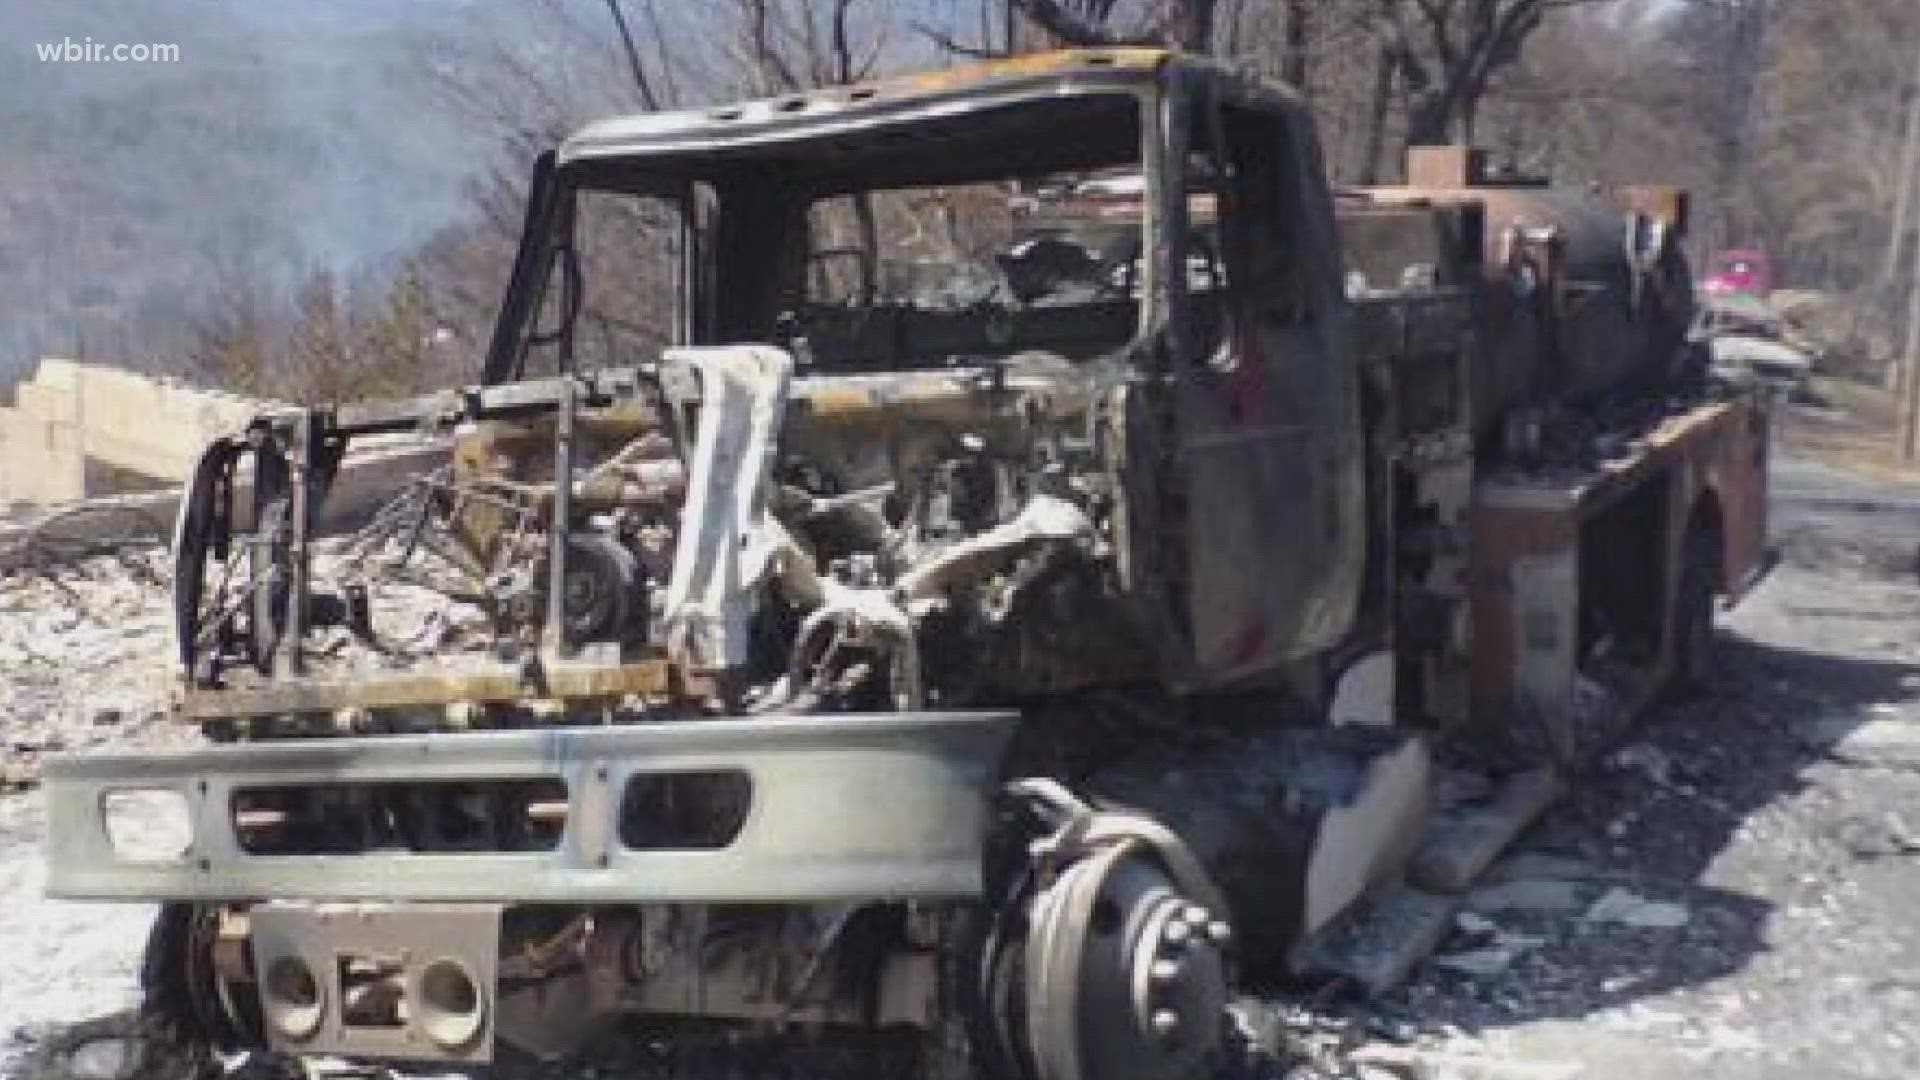 One fire chief estimated that to replace one truck would cost between $300,000-$400,000.